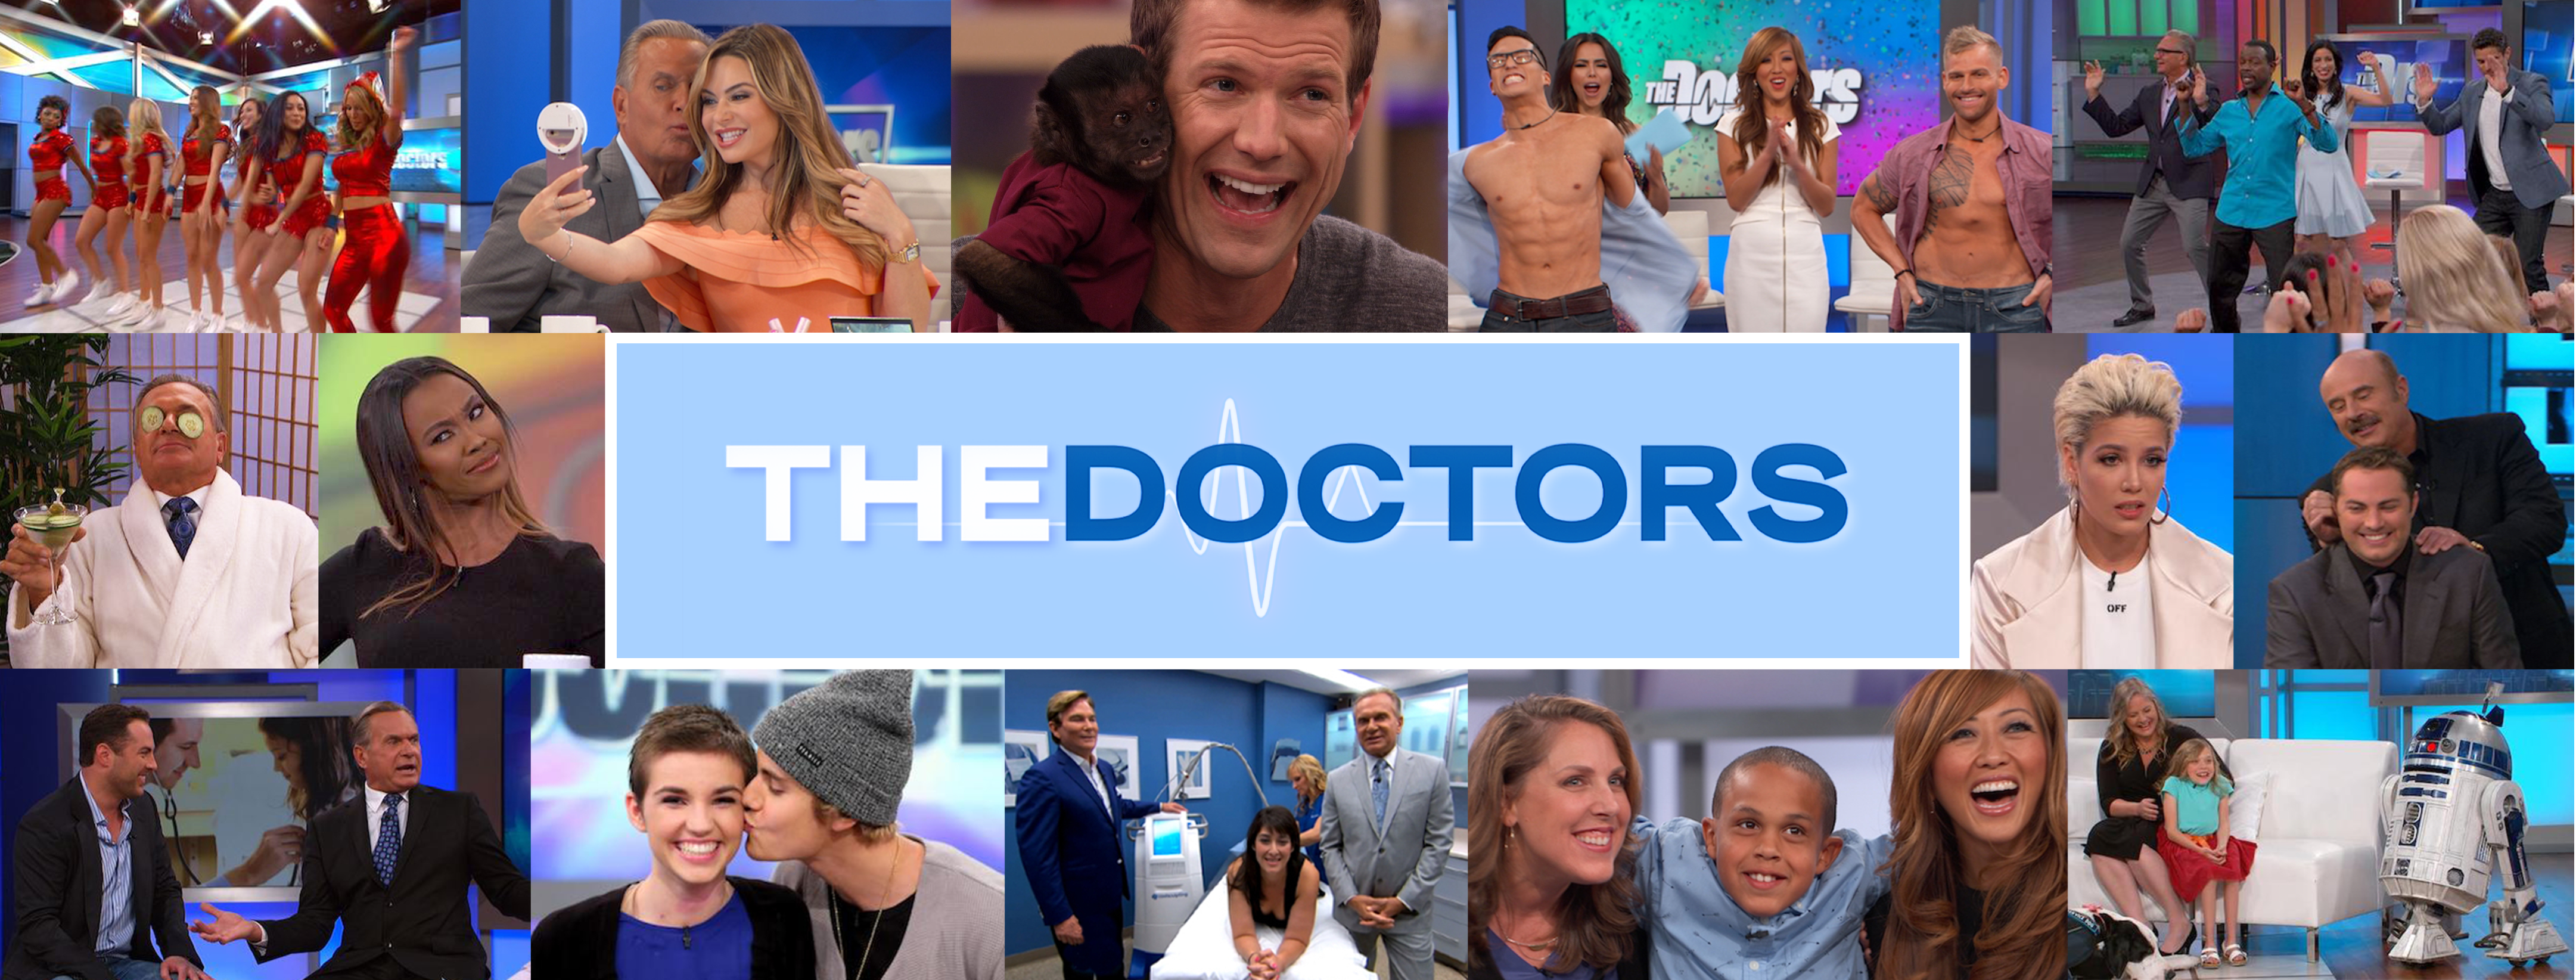 Lightning Strikes Husband and Pregnant Wife | The Doctors TV Show